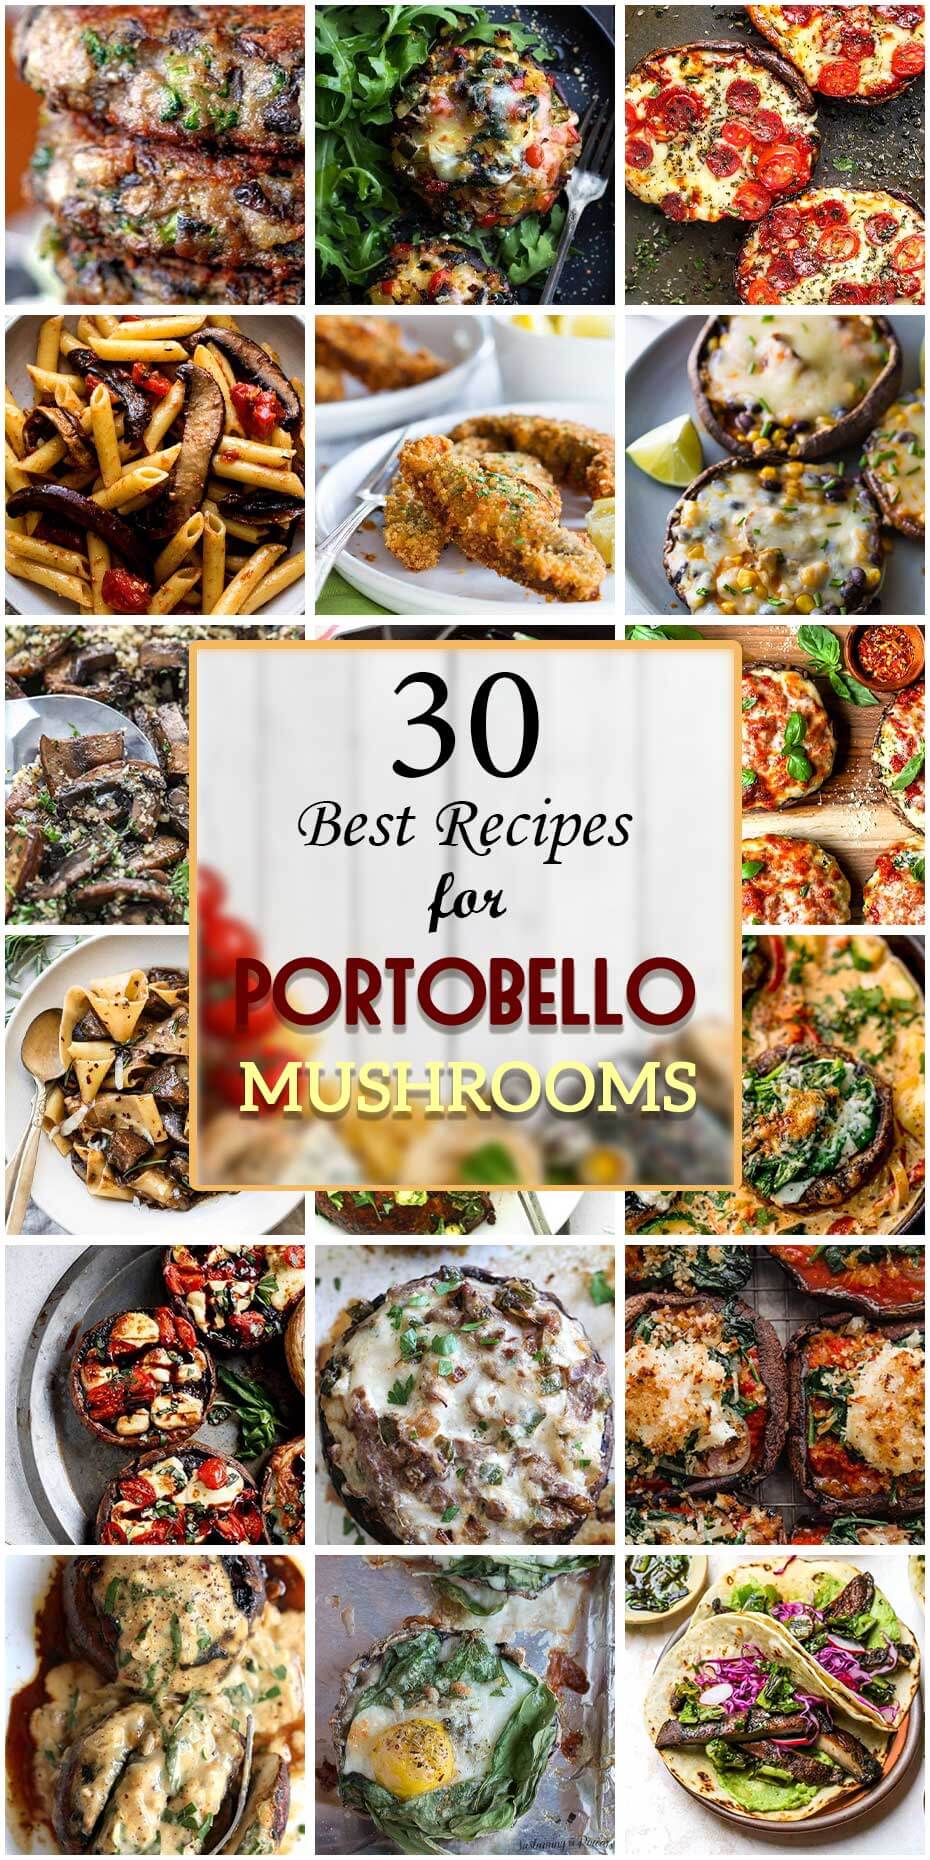 30 Insanely Good Dishes Made with Portobello Mushrooms, Portobello Mushrooms